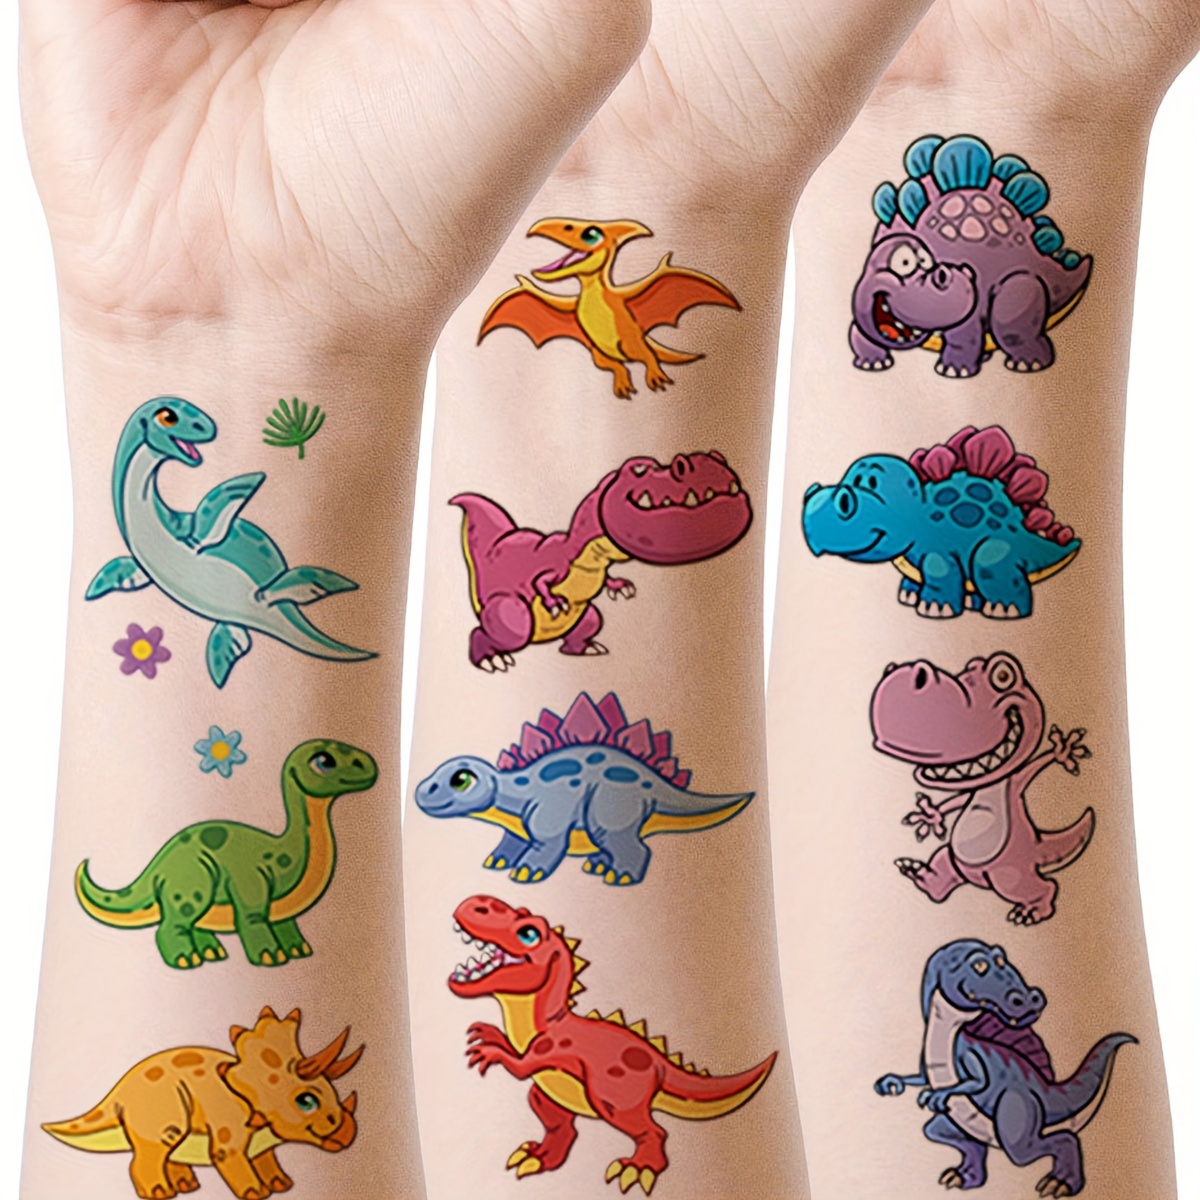 

10 Sheets Cartoon Dinosaur Temporary Tattoo Stickers, Birthday Gift Fun Art Fake Tattoo Stickers, Party Decorations For Boys And Girls